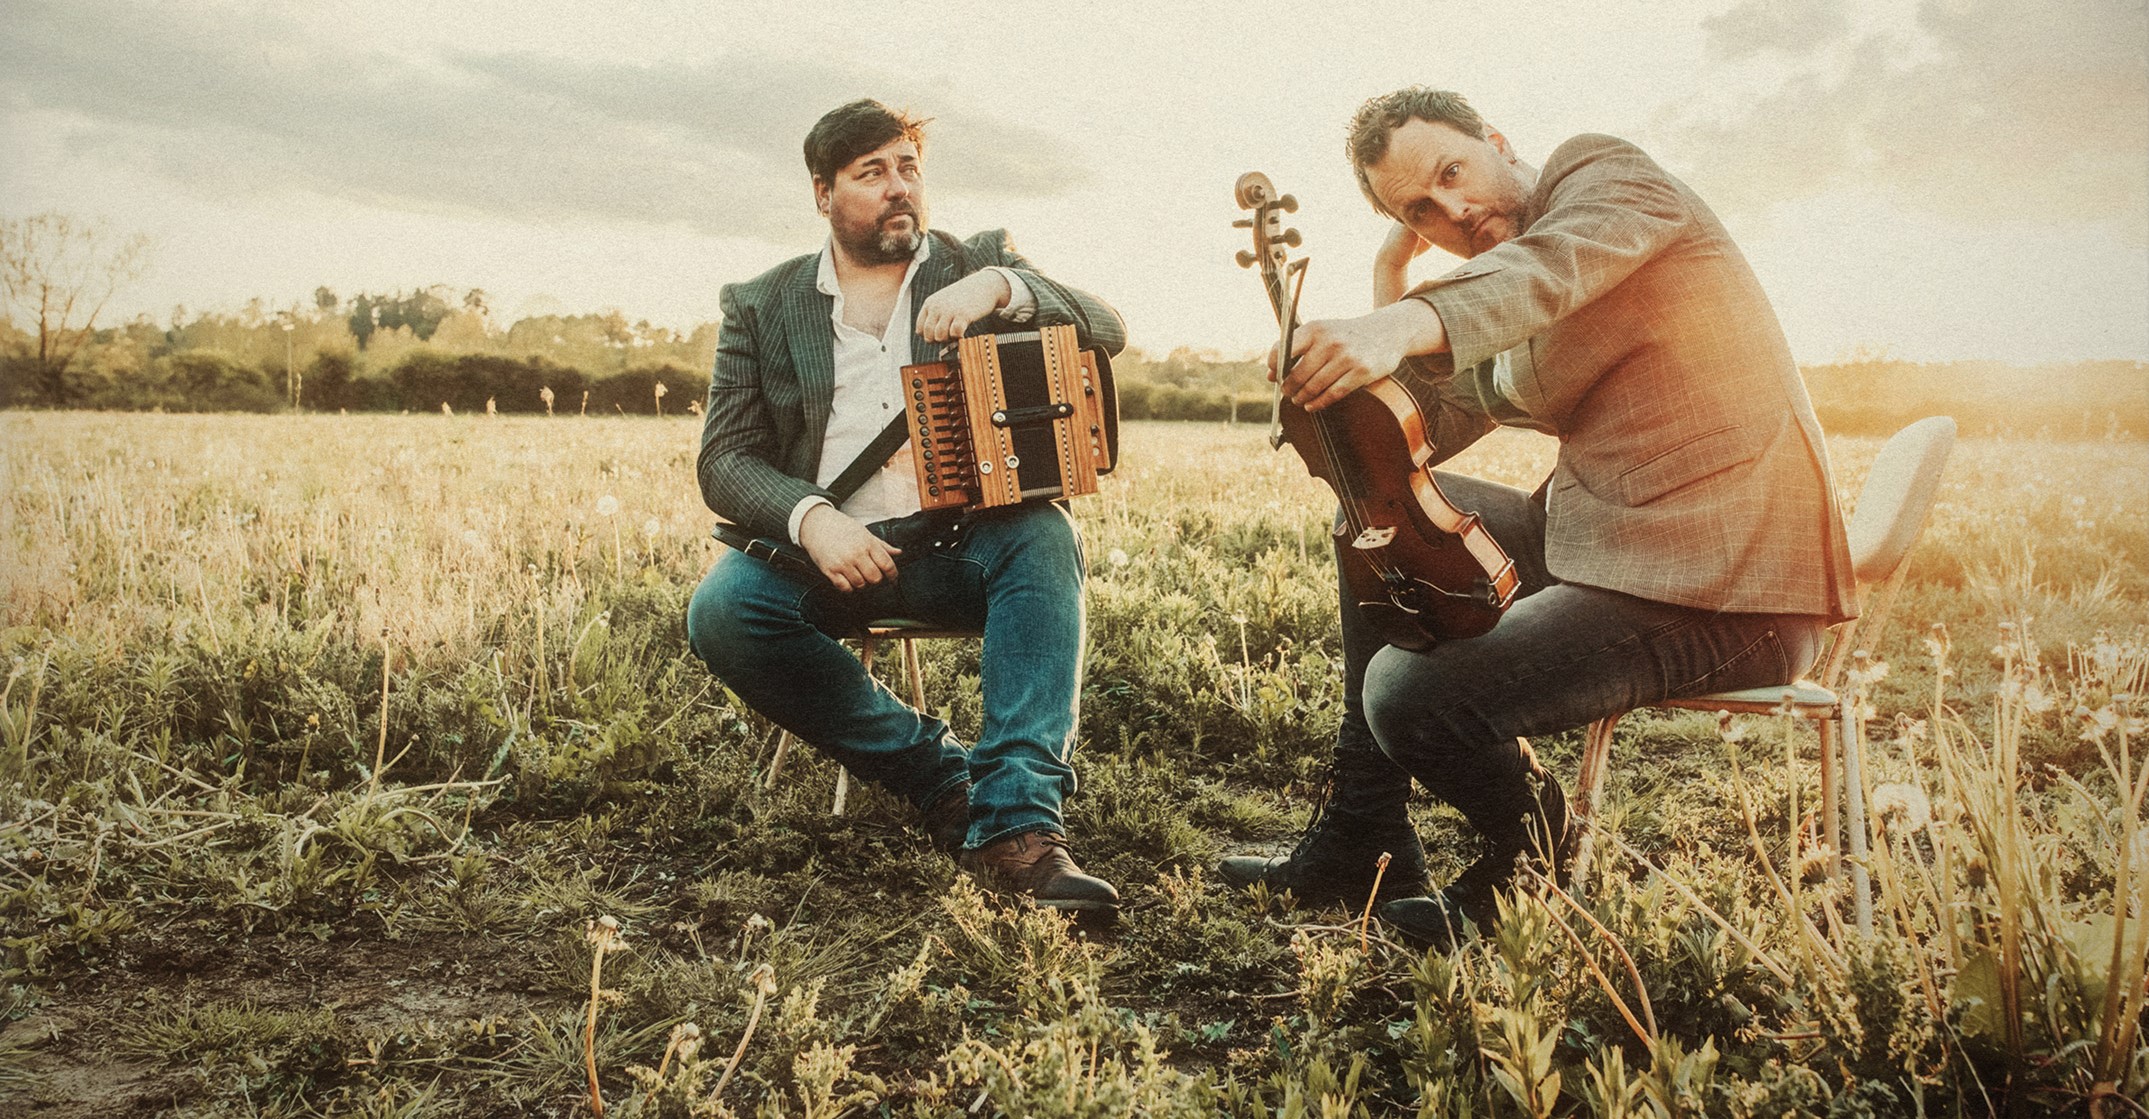 Spiers & Boden posing with their instruments on chairs in a field